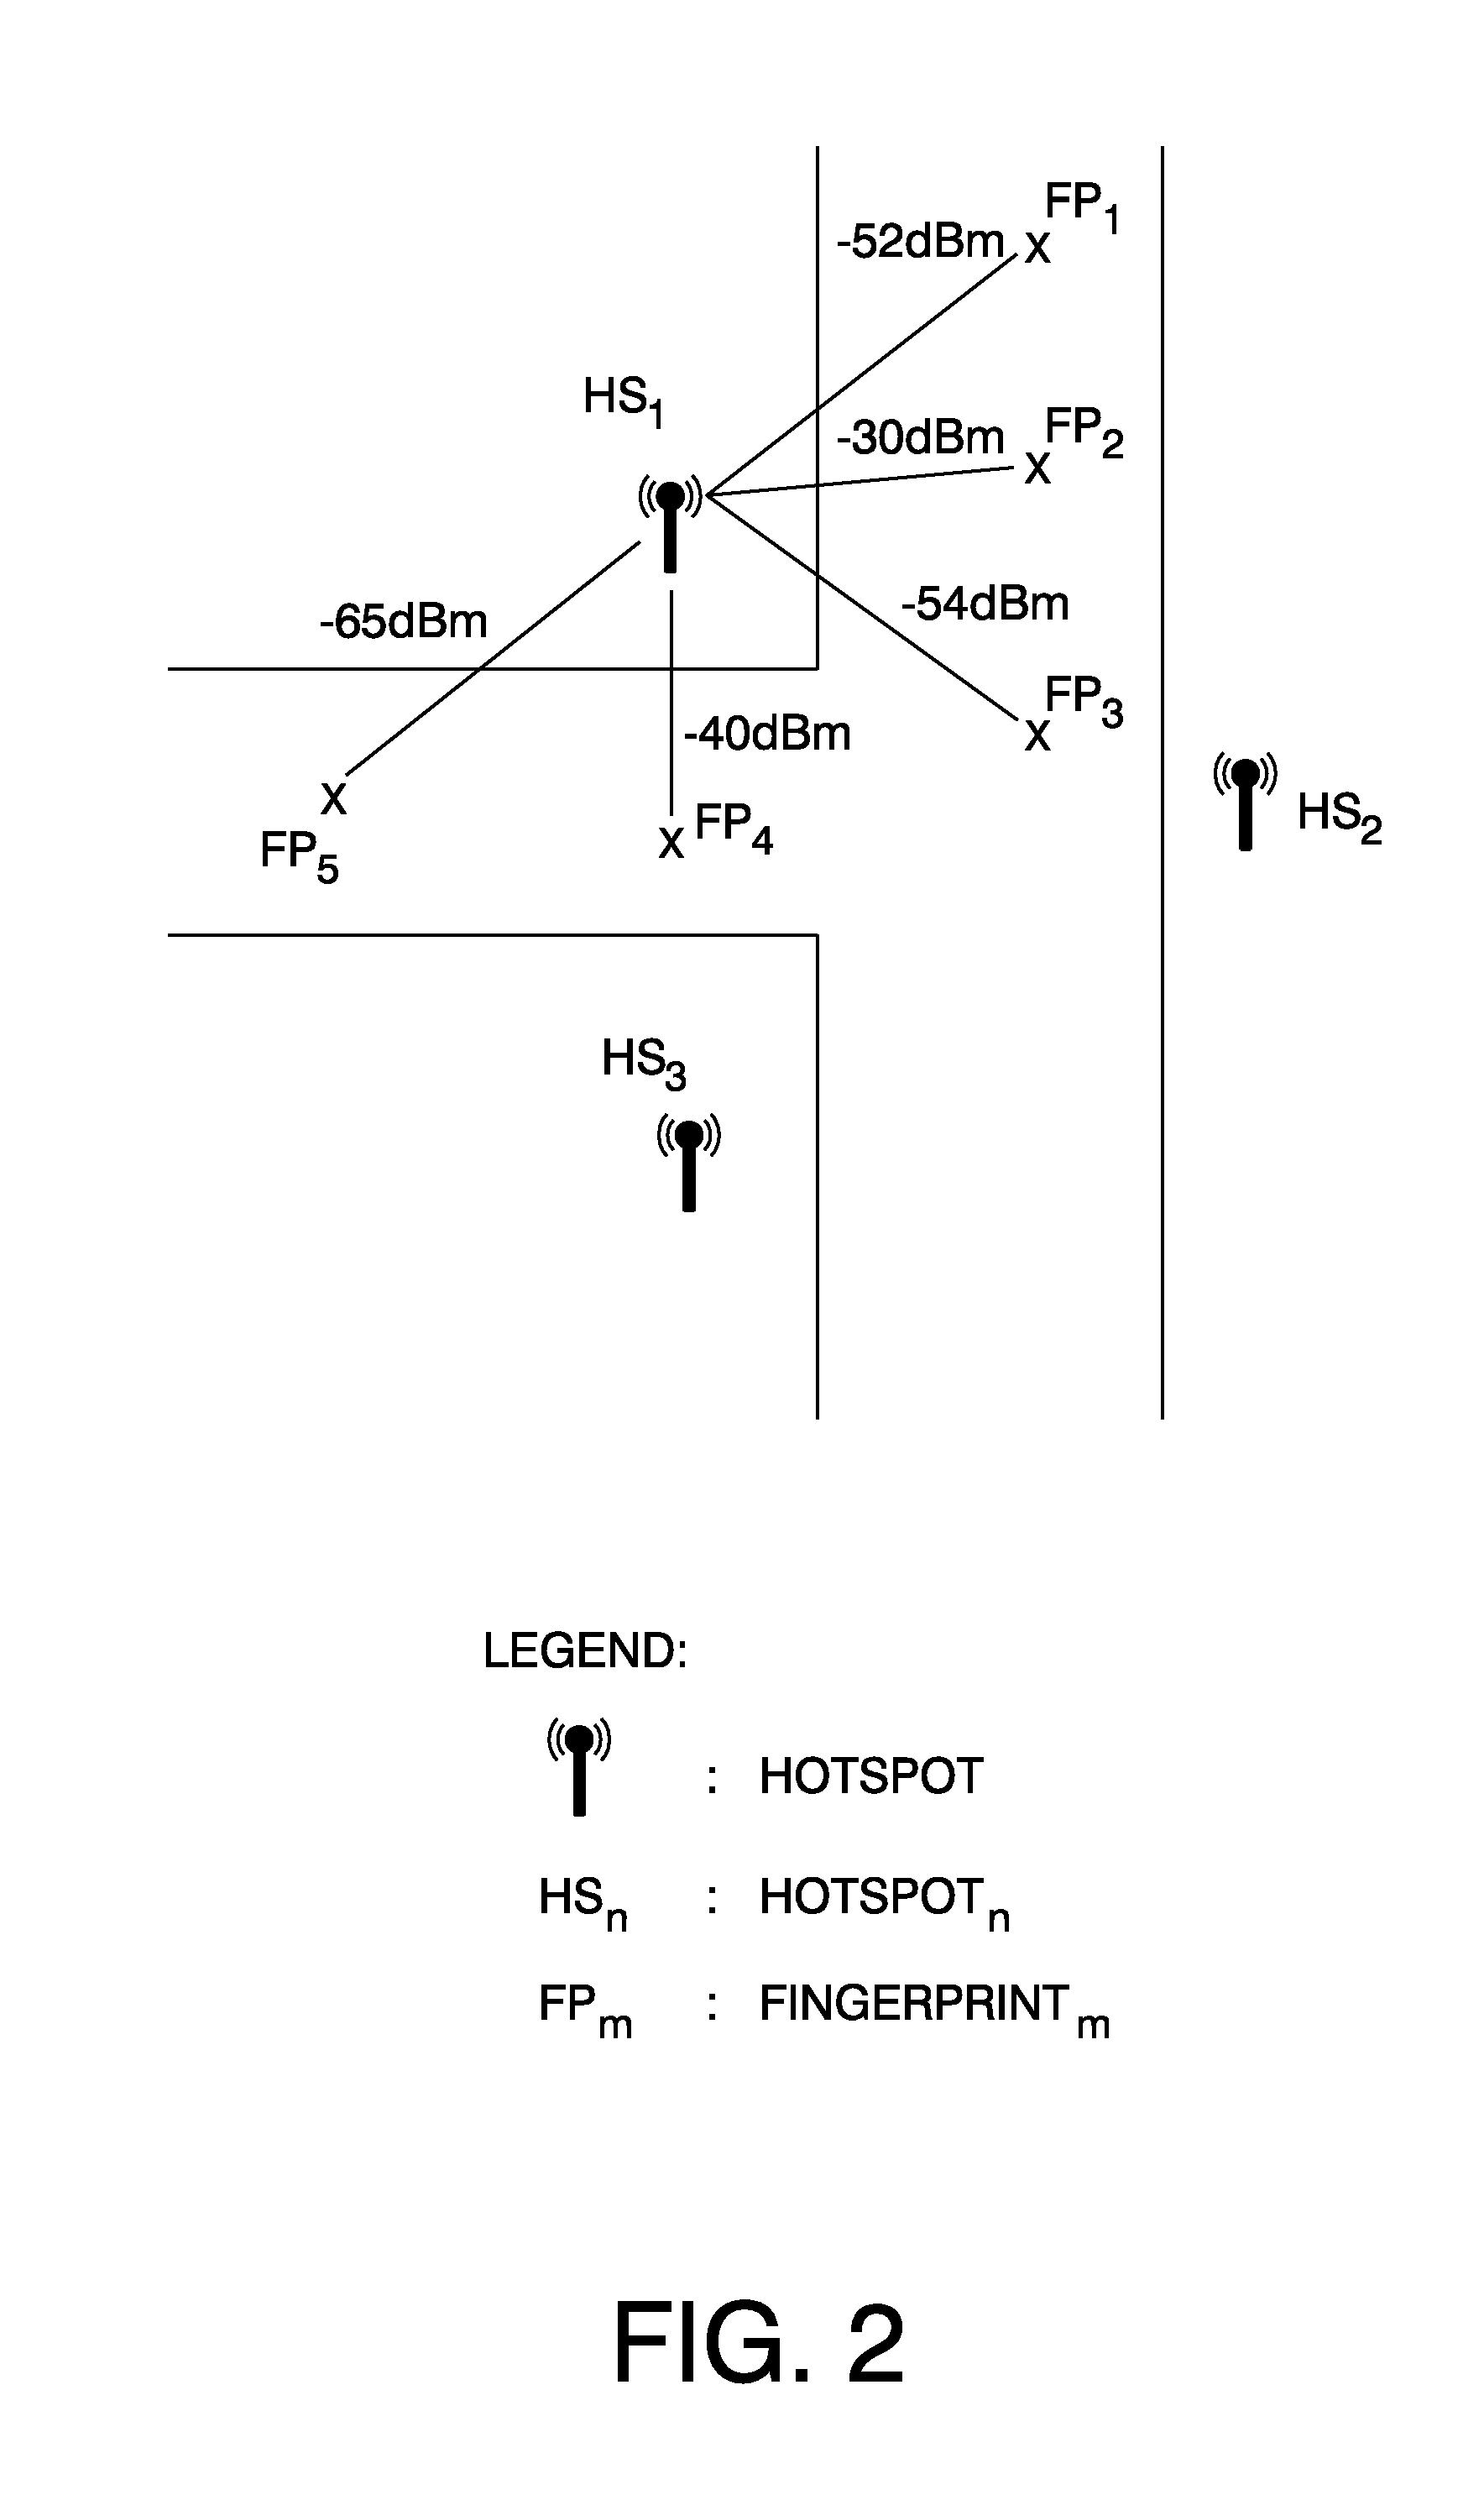 Determining positions in a wireless radio system